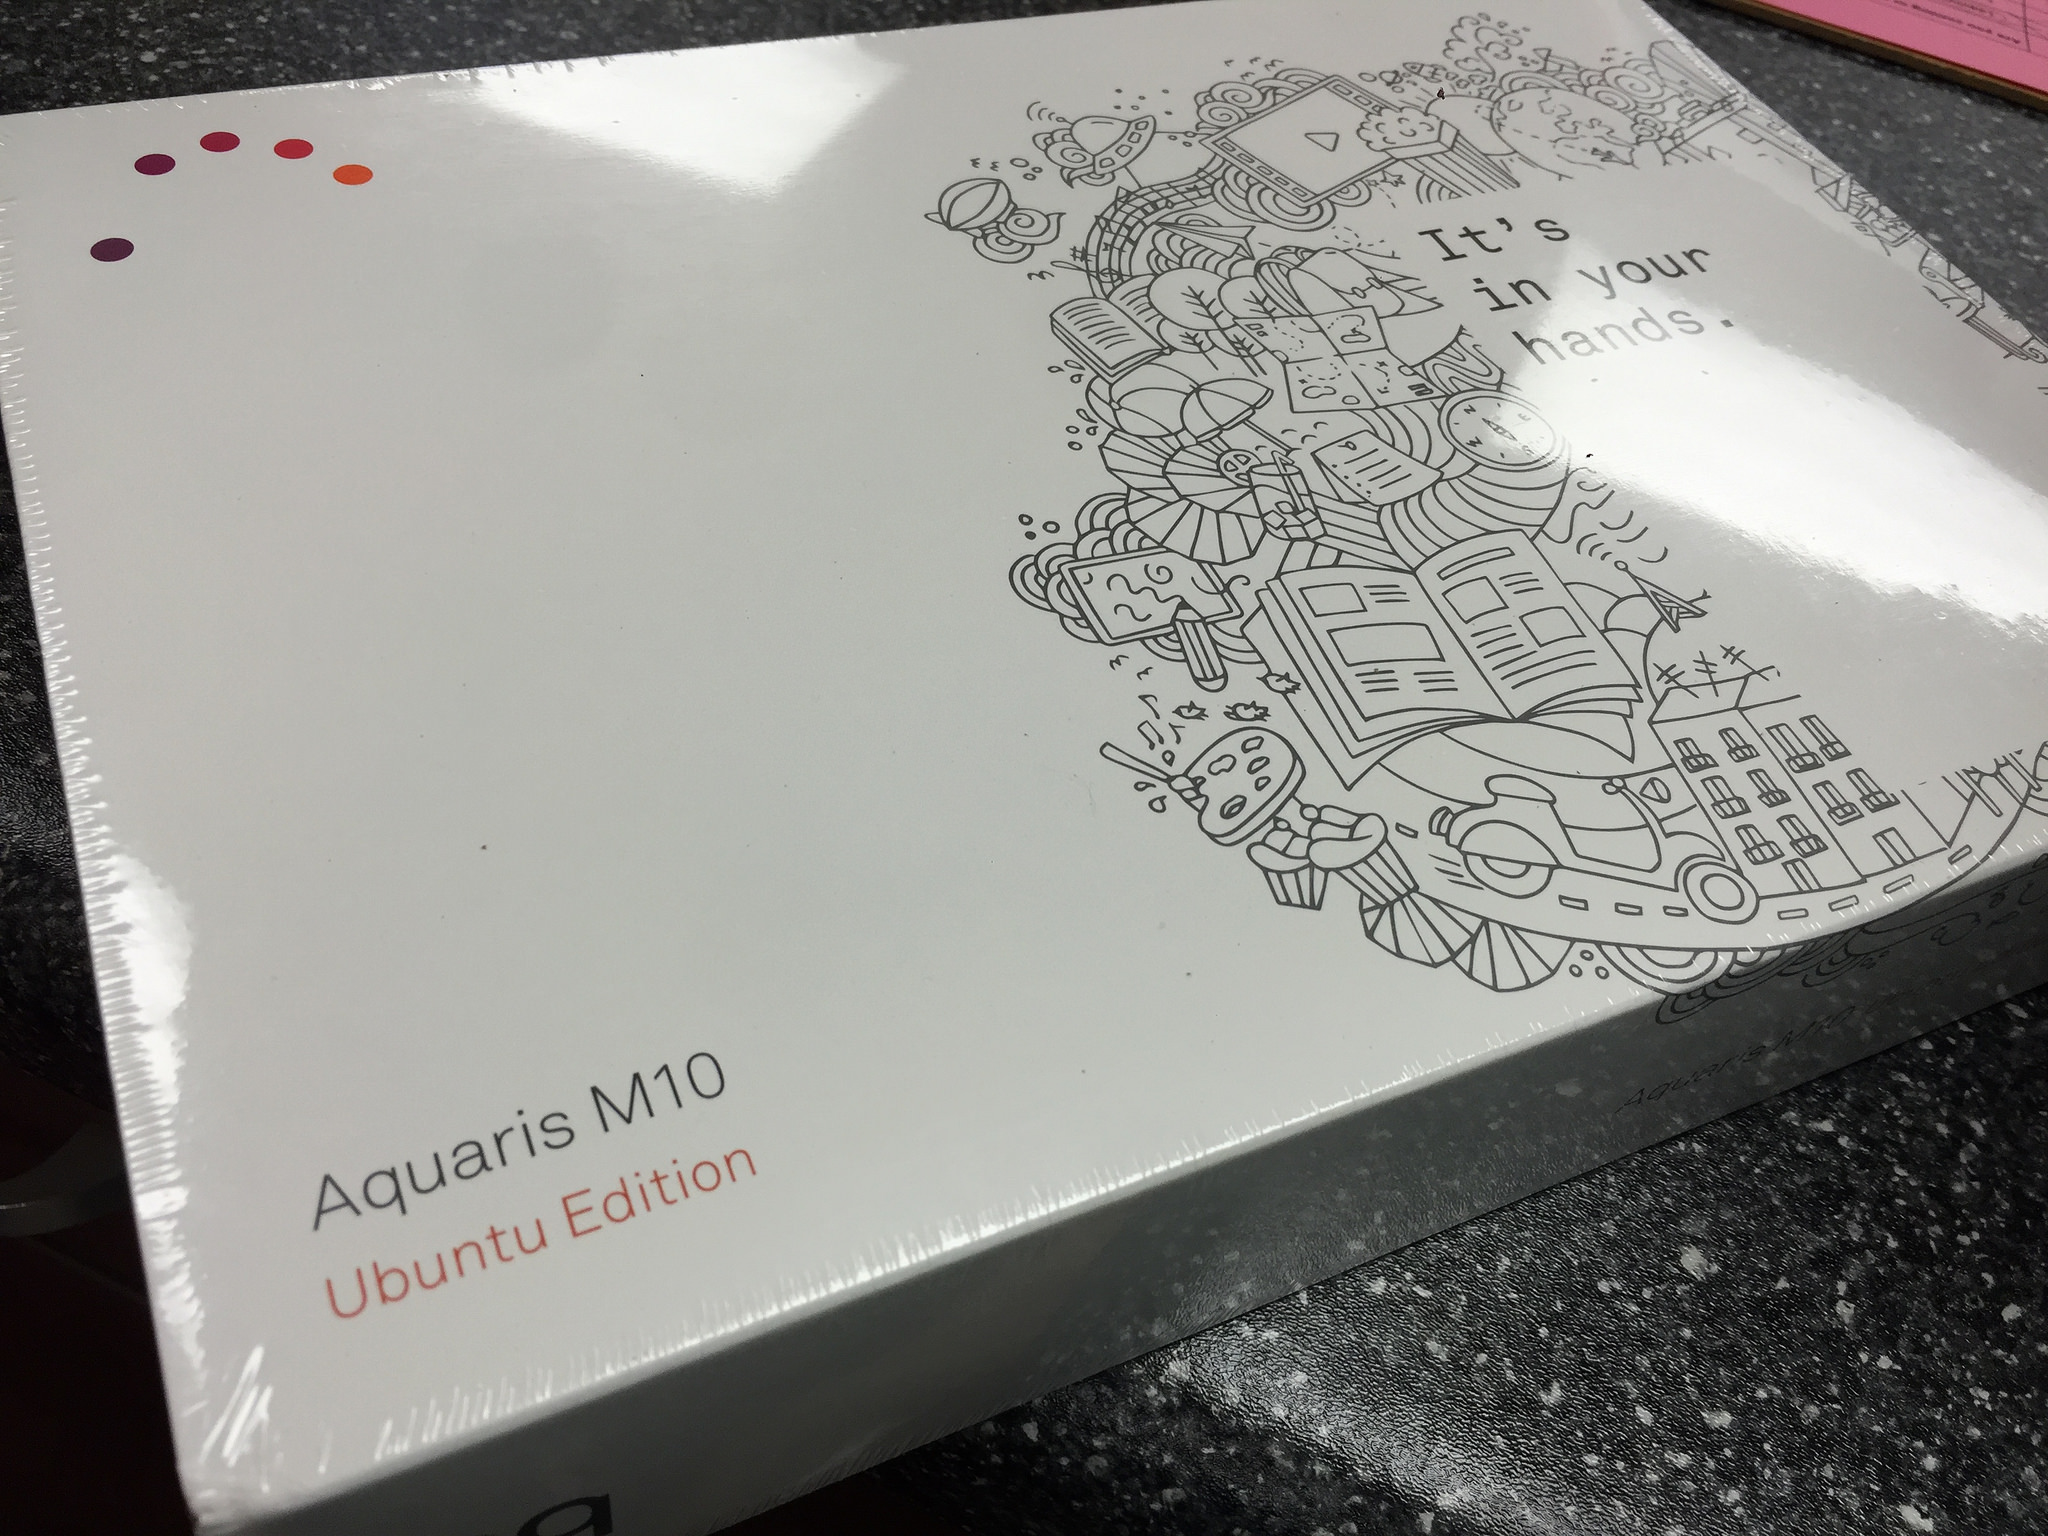 First look at the Ubuntu Tablet